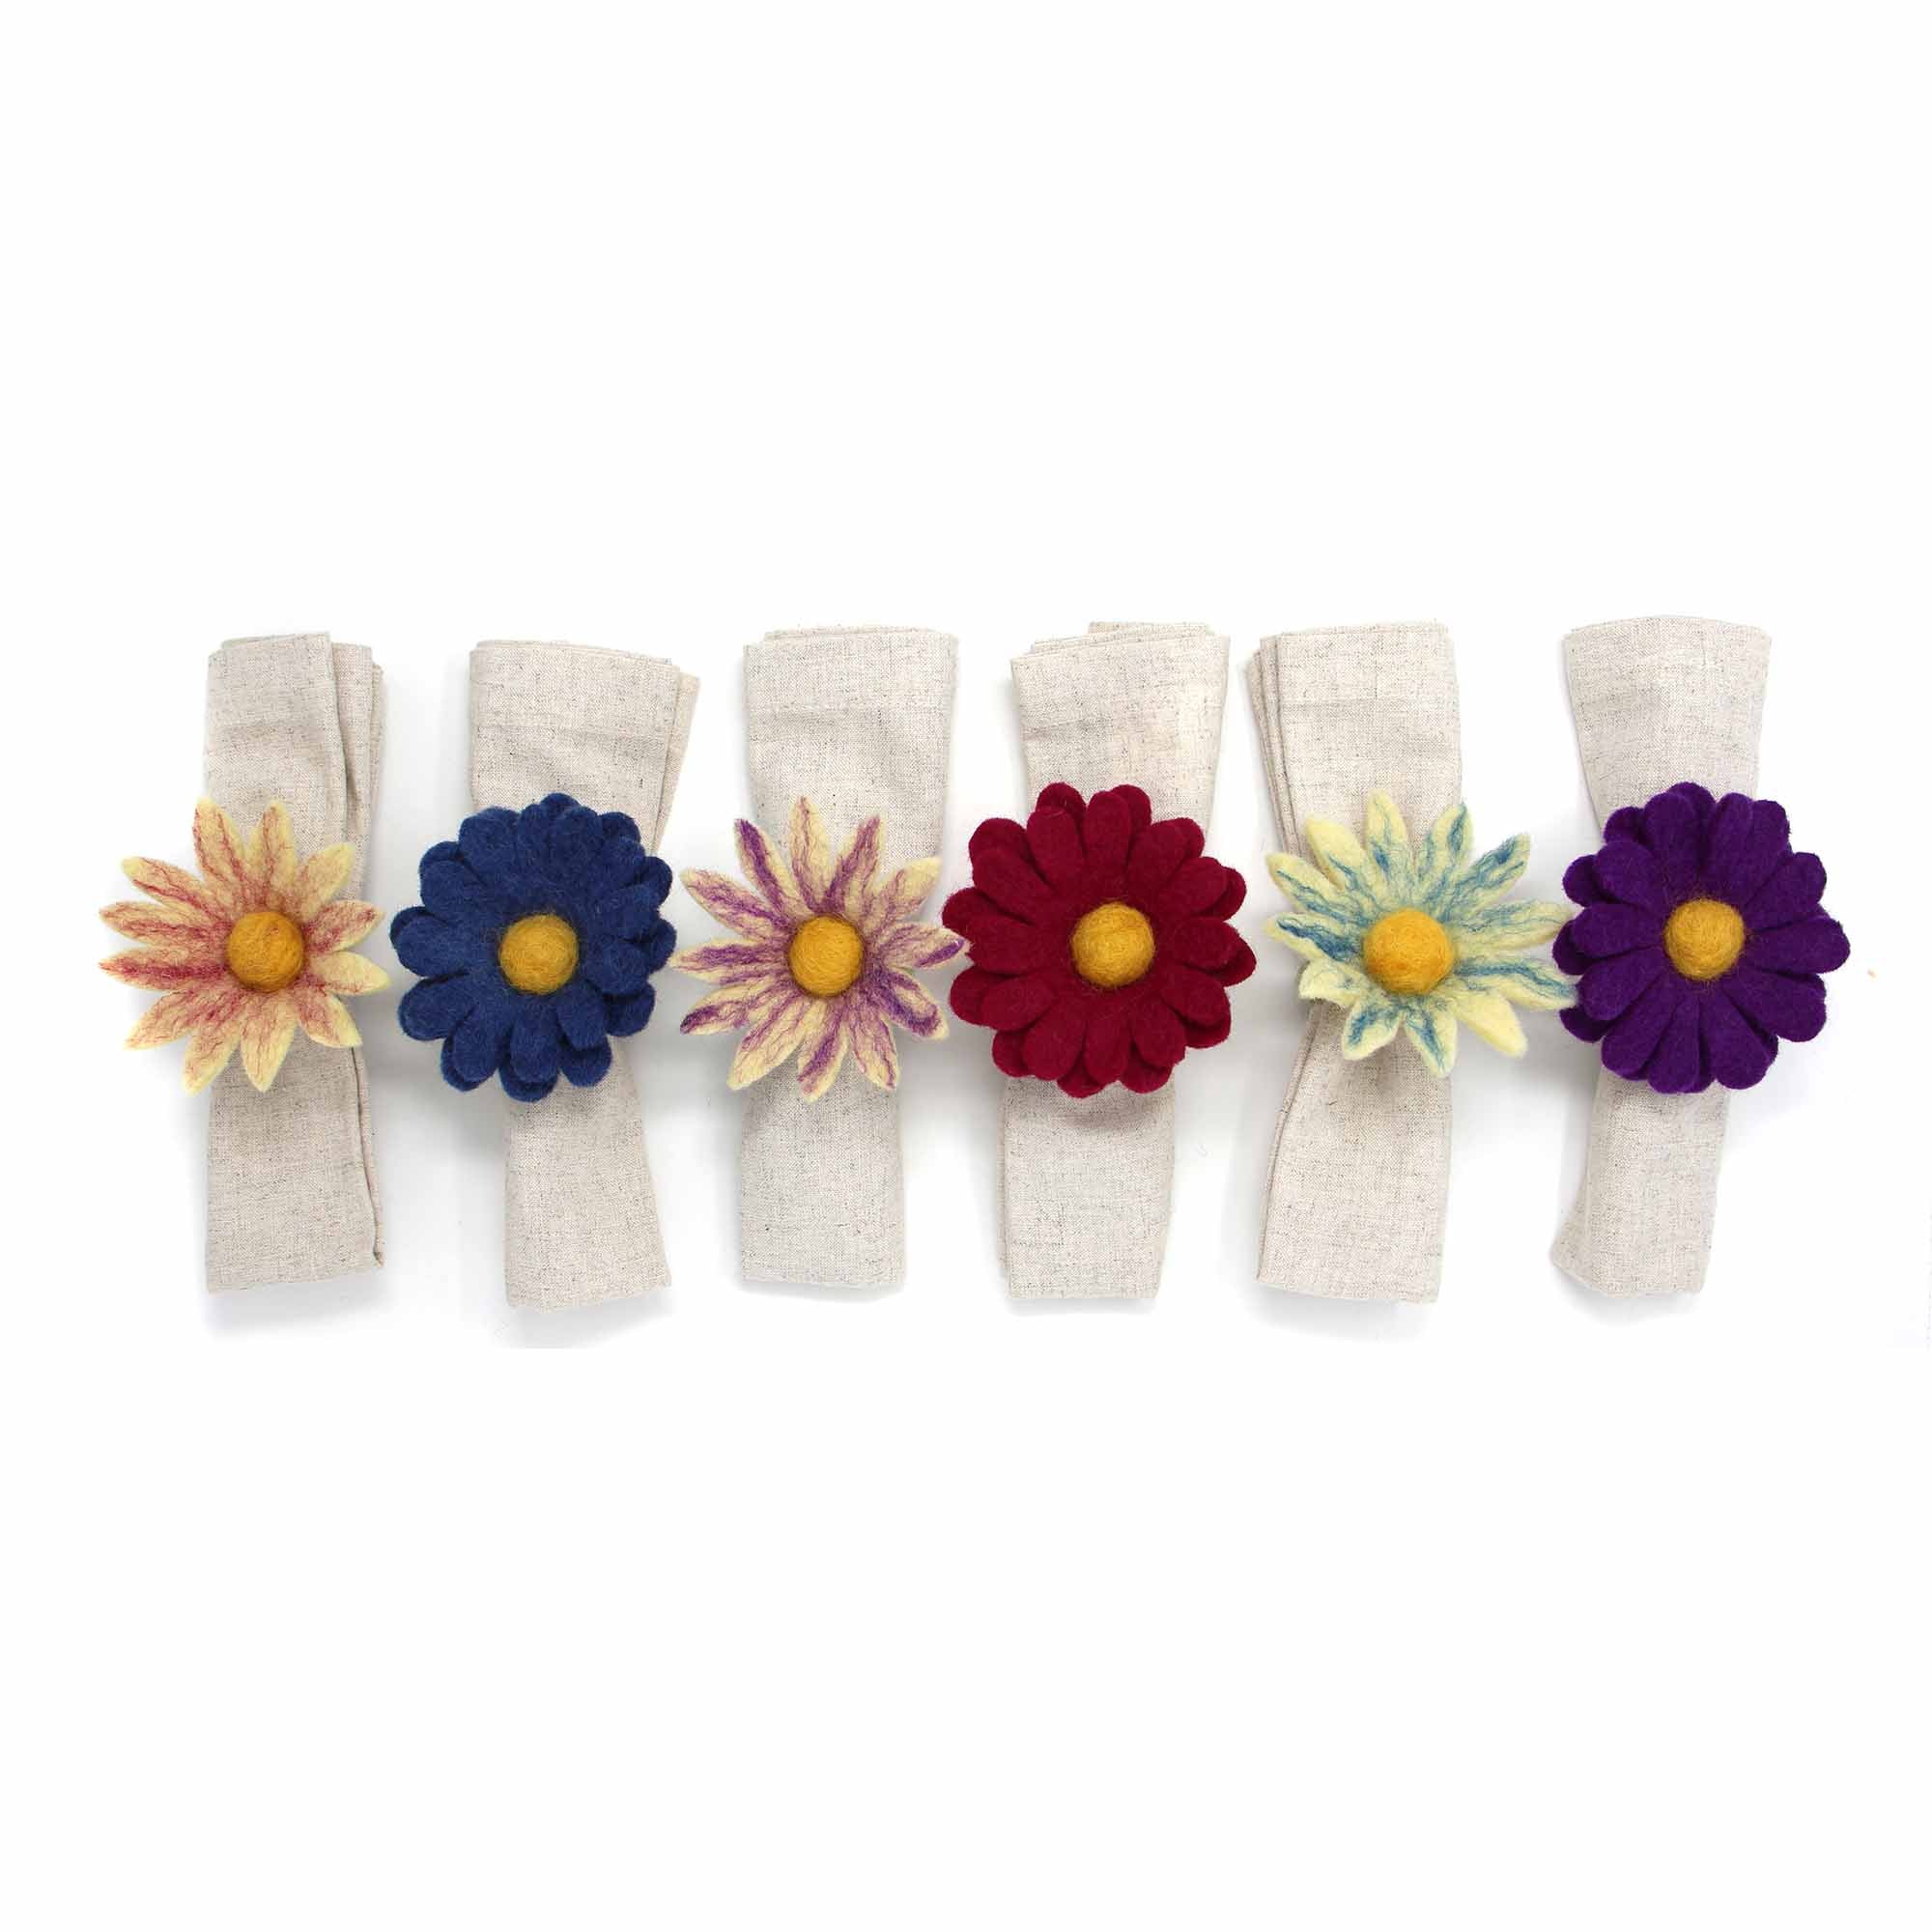 Hand Crafted Felt from Nepal: Set of 6 Napkin Rings, Assorted Daisies for Fall